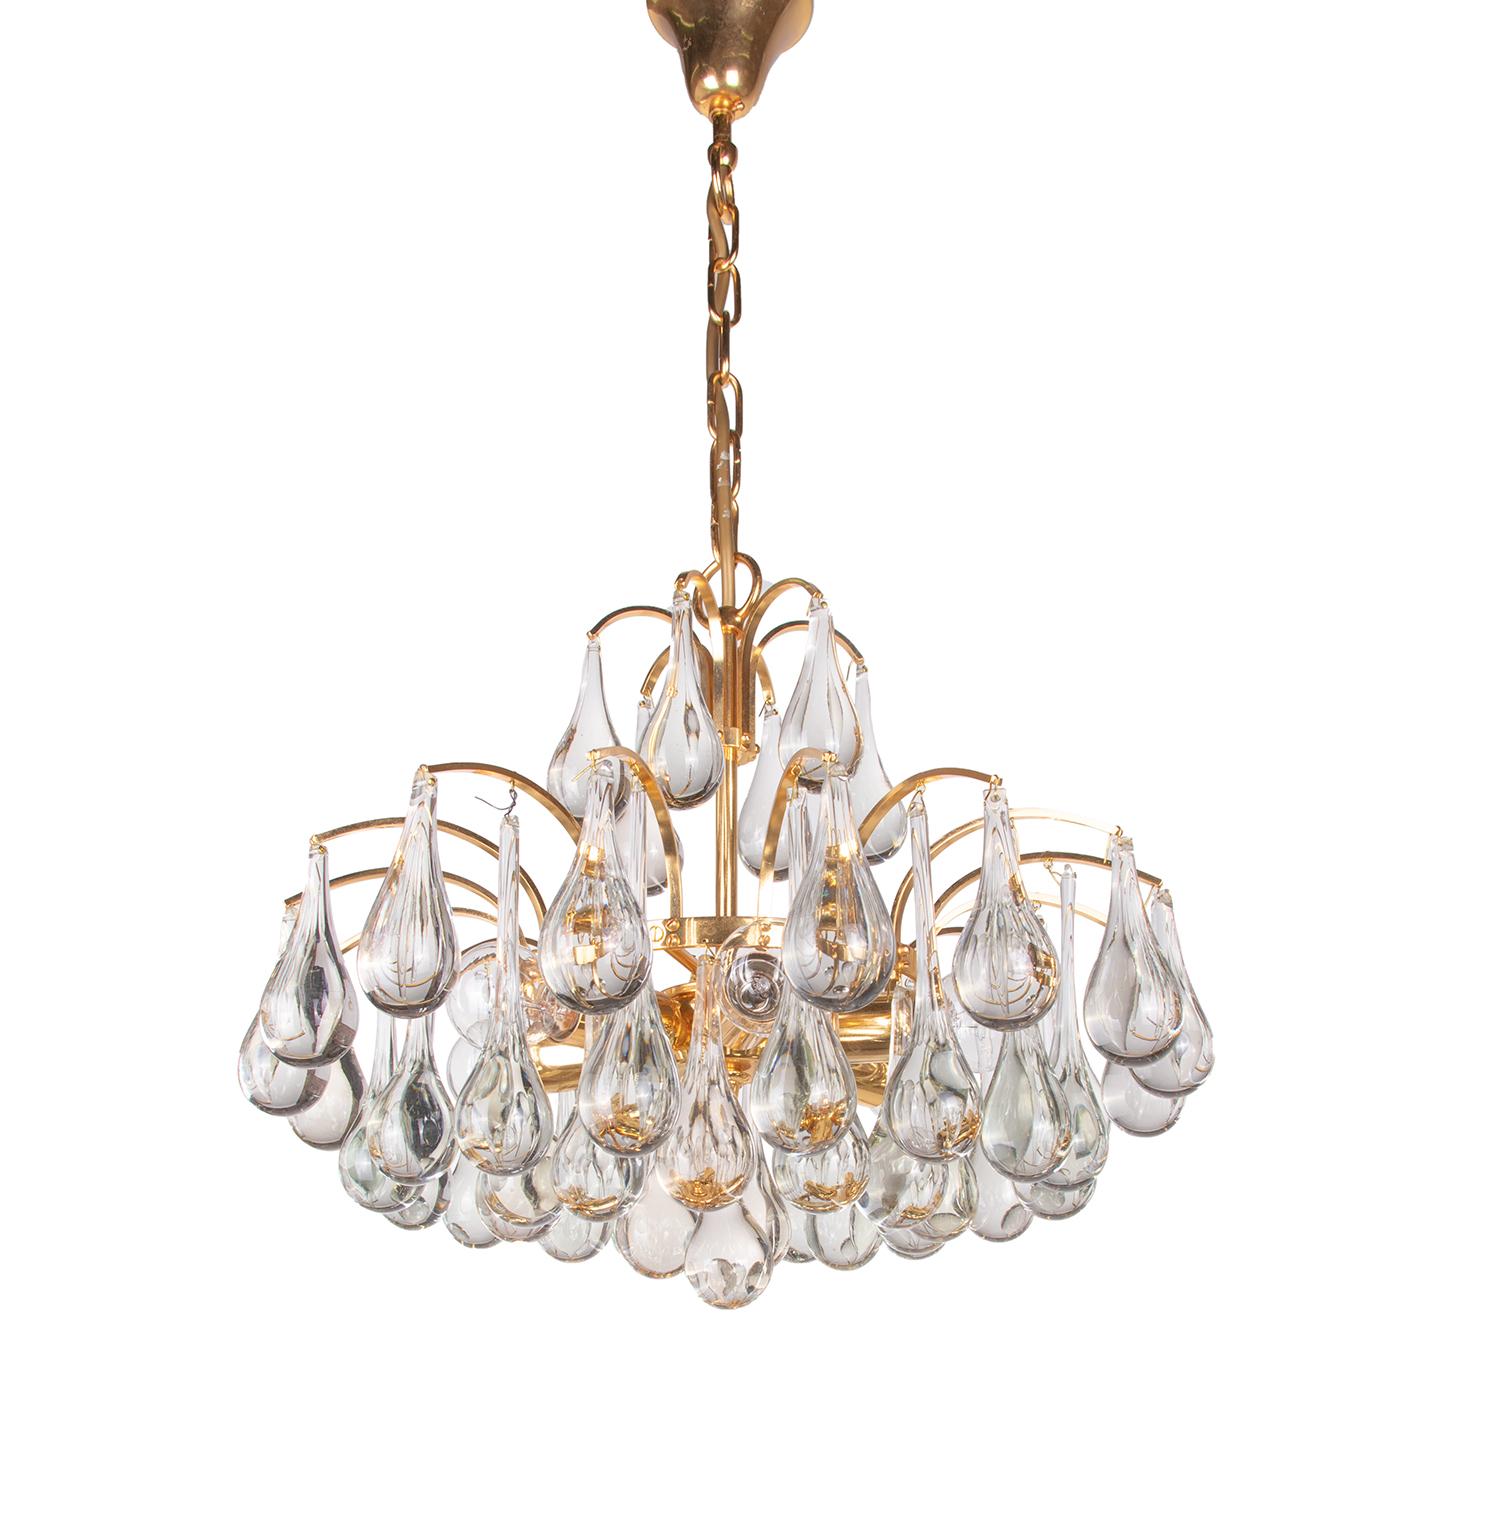 Elegant chandelier with a gold-plated brass frame and Murano glass teardrops. These lamps have an incomparable unique character. A touch of luxury fills the room. 
Manufacturer: Palwa, Palme & Walter, Germany, 1960s. 
Measures: diameter 15.75